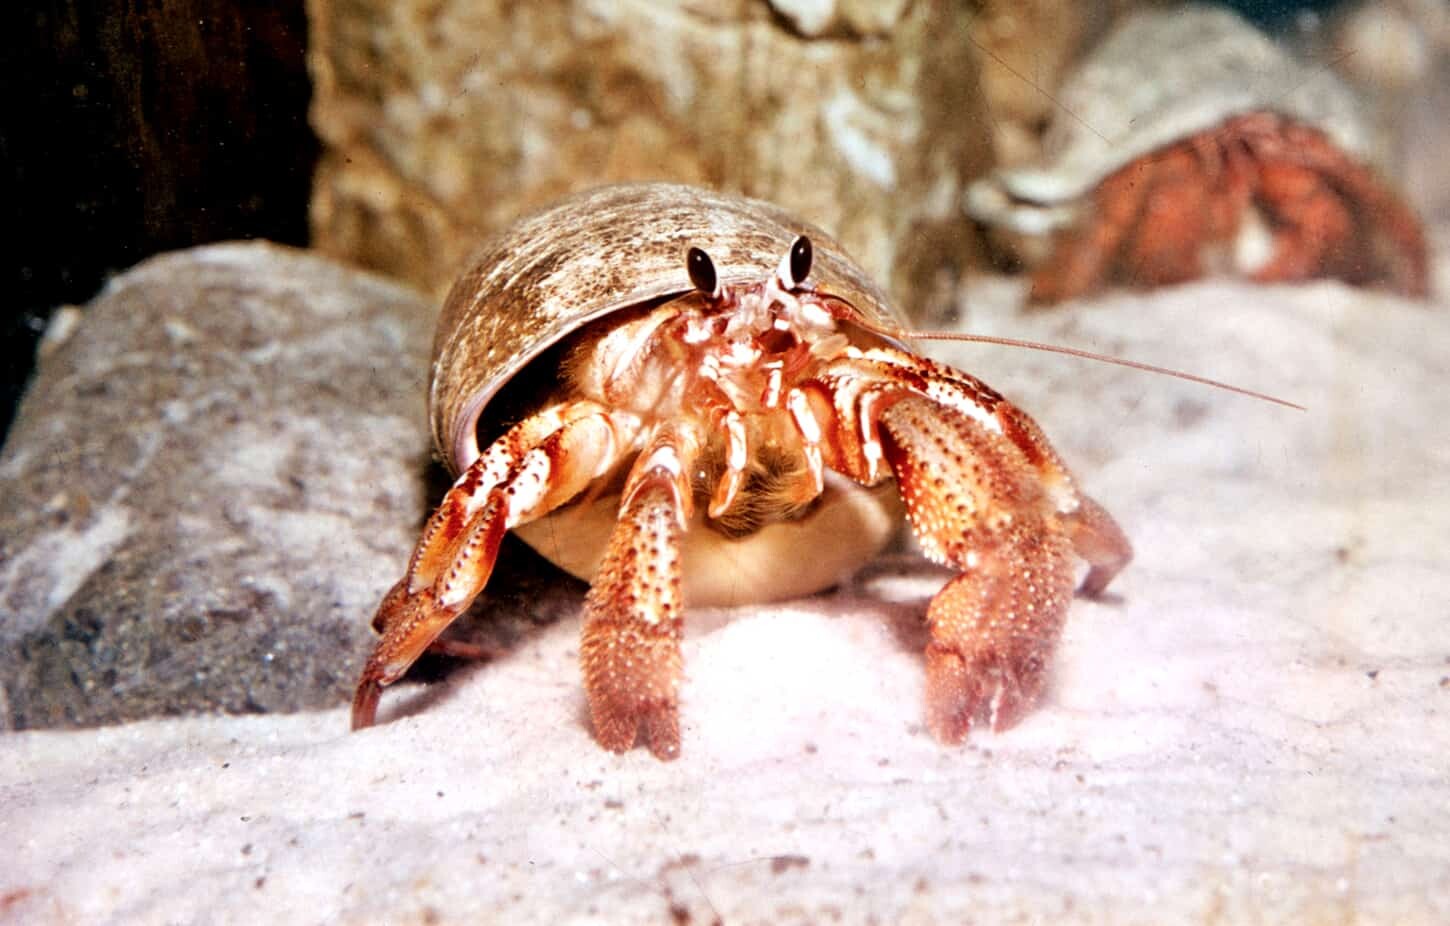 How Often Do You Need to Change Your Sponges for Hermit Crabs?